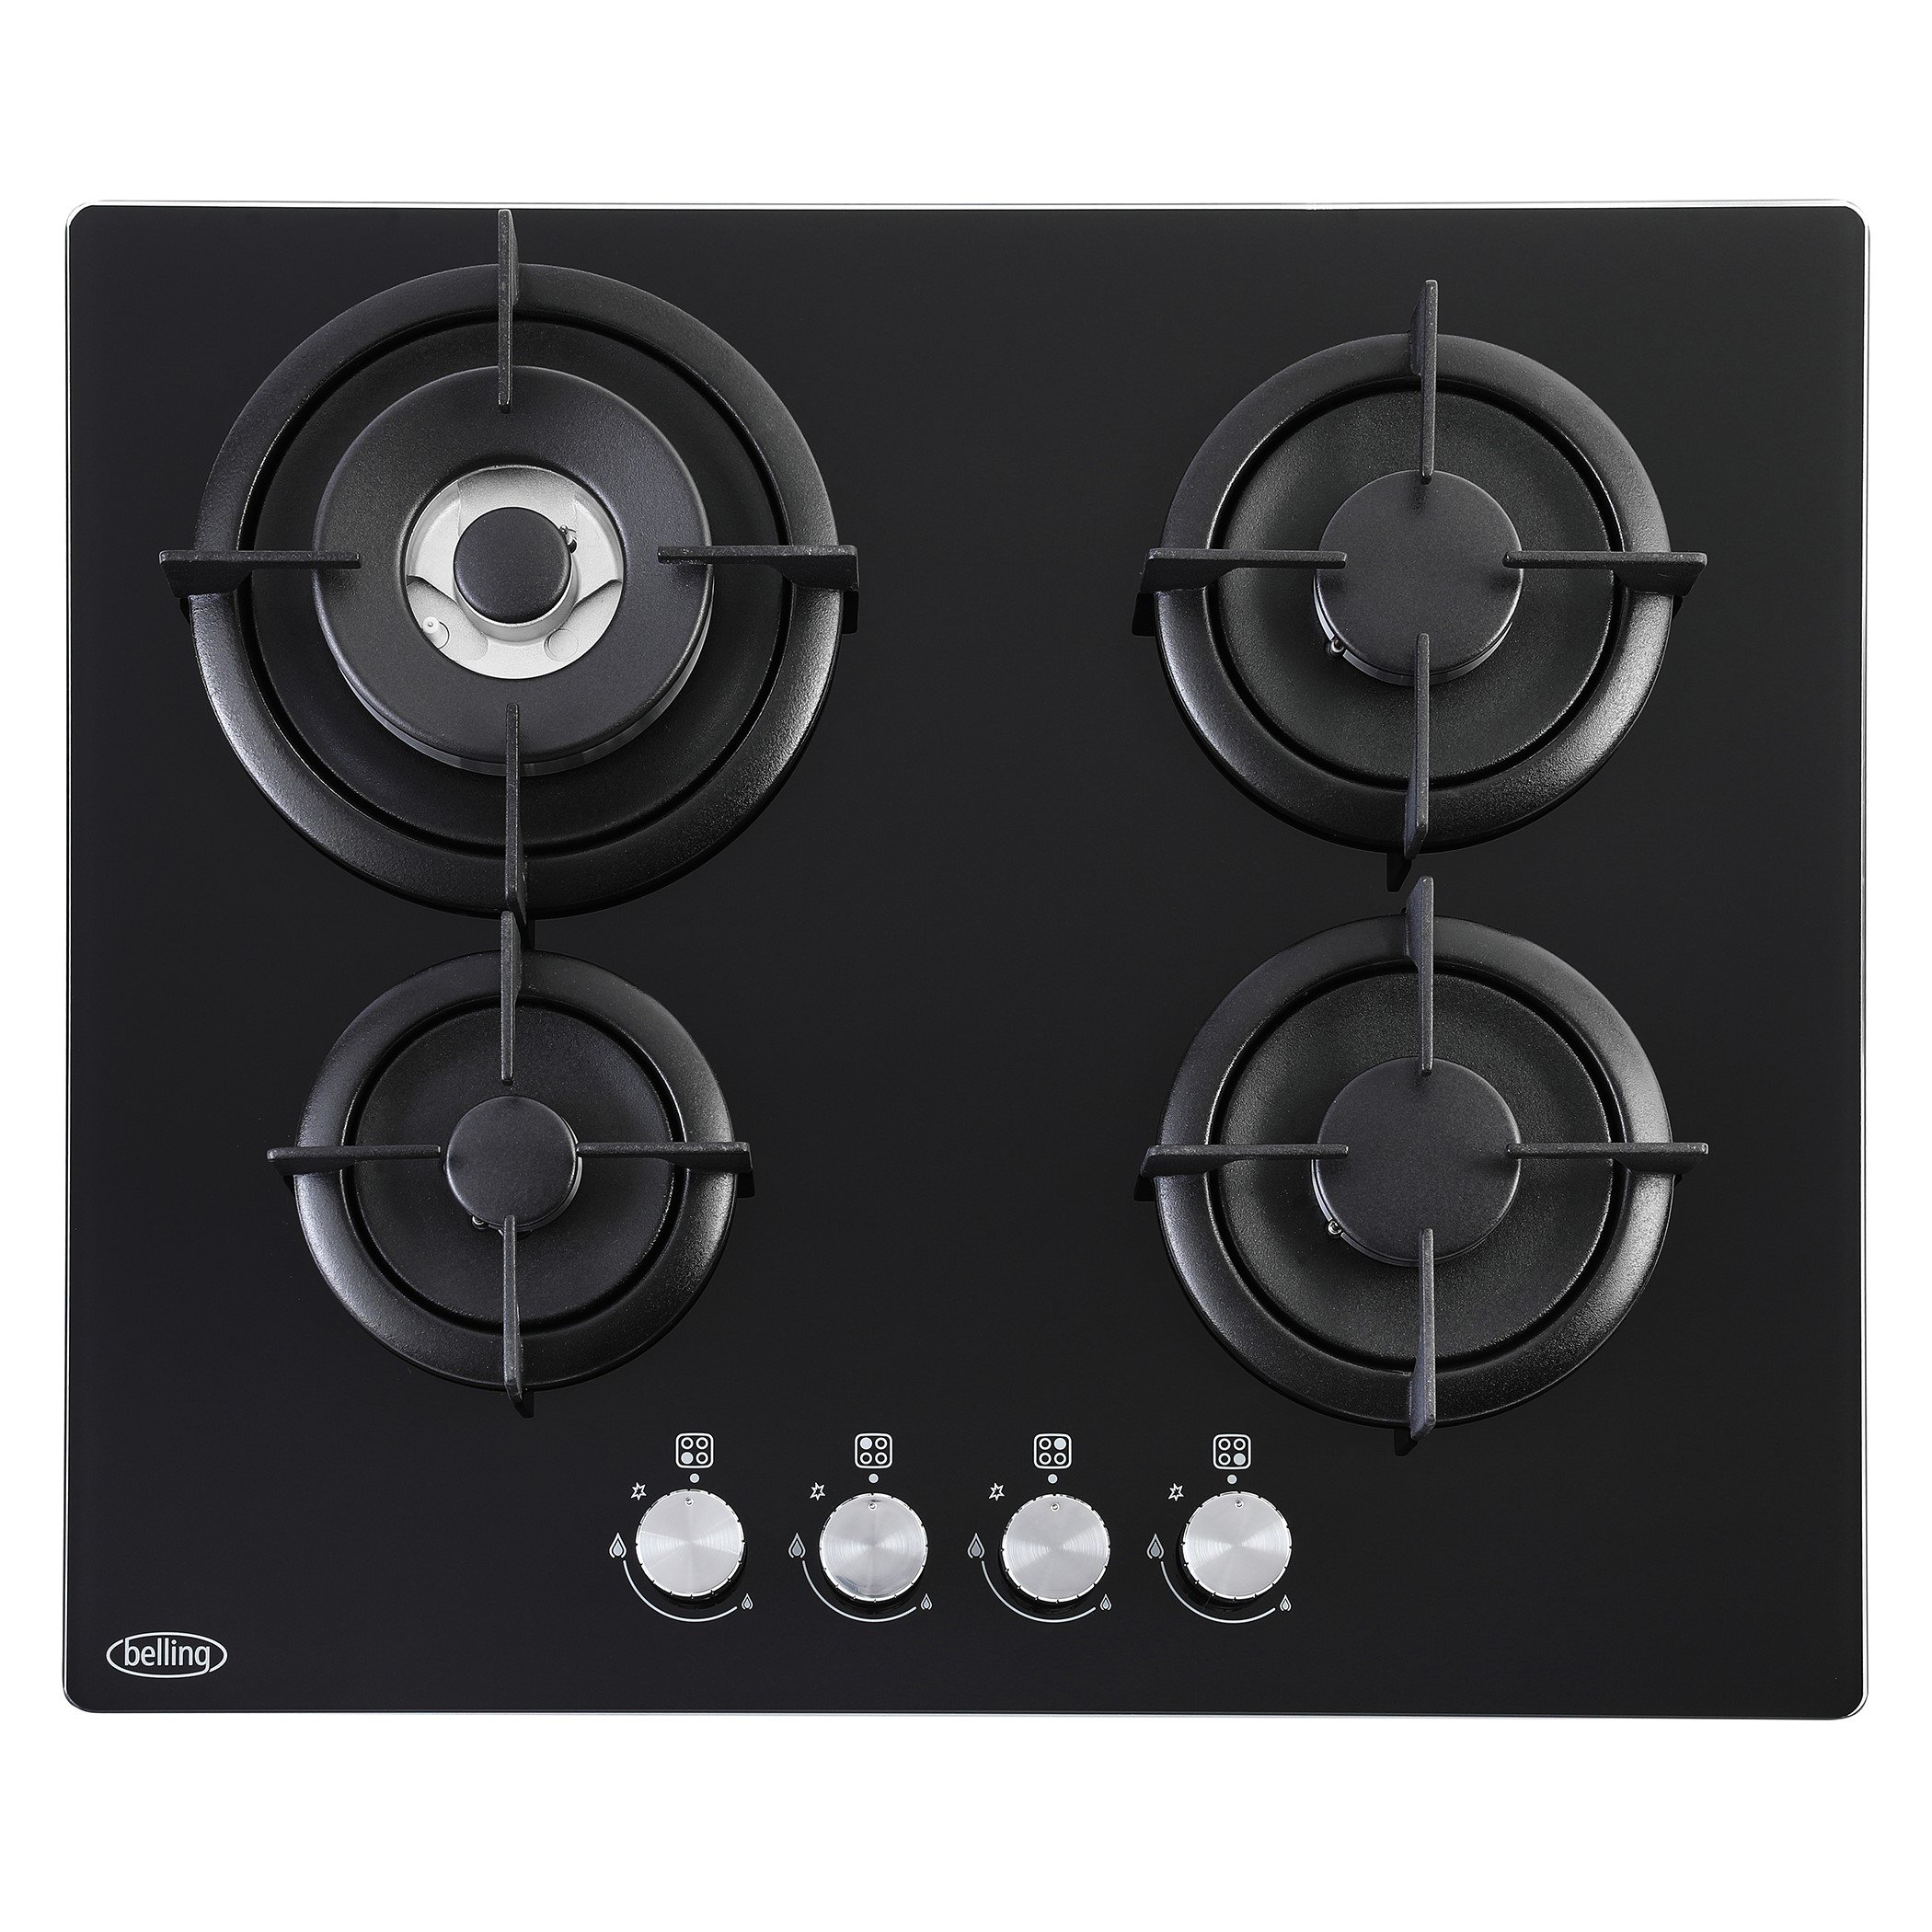 60cm gas through glass hob with powerful 3.6kW wok burner and ribbon iron pan supports